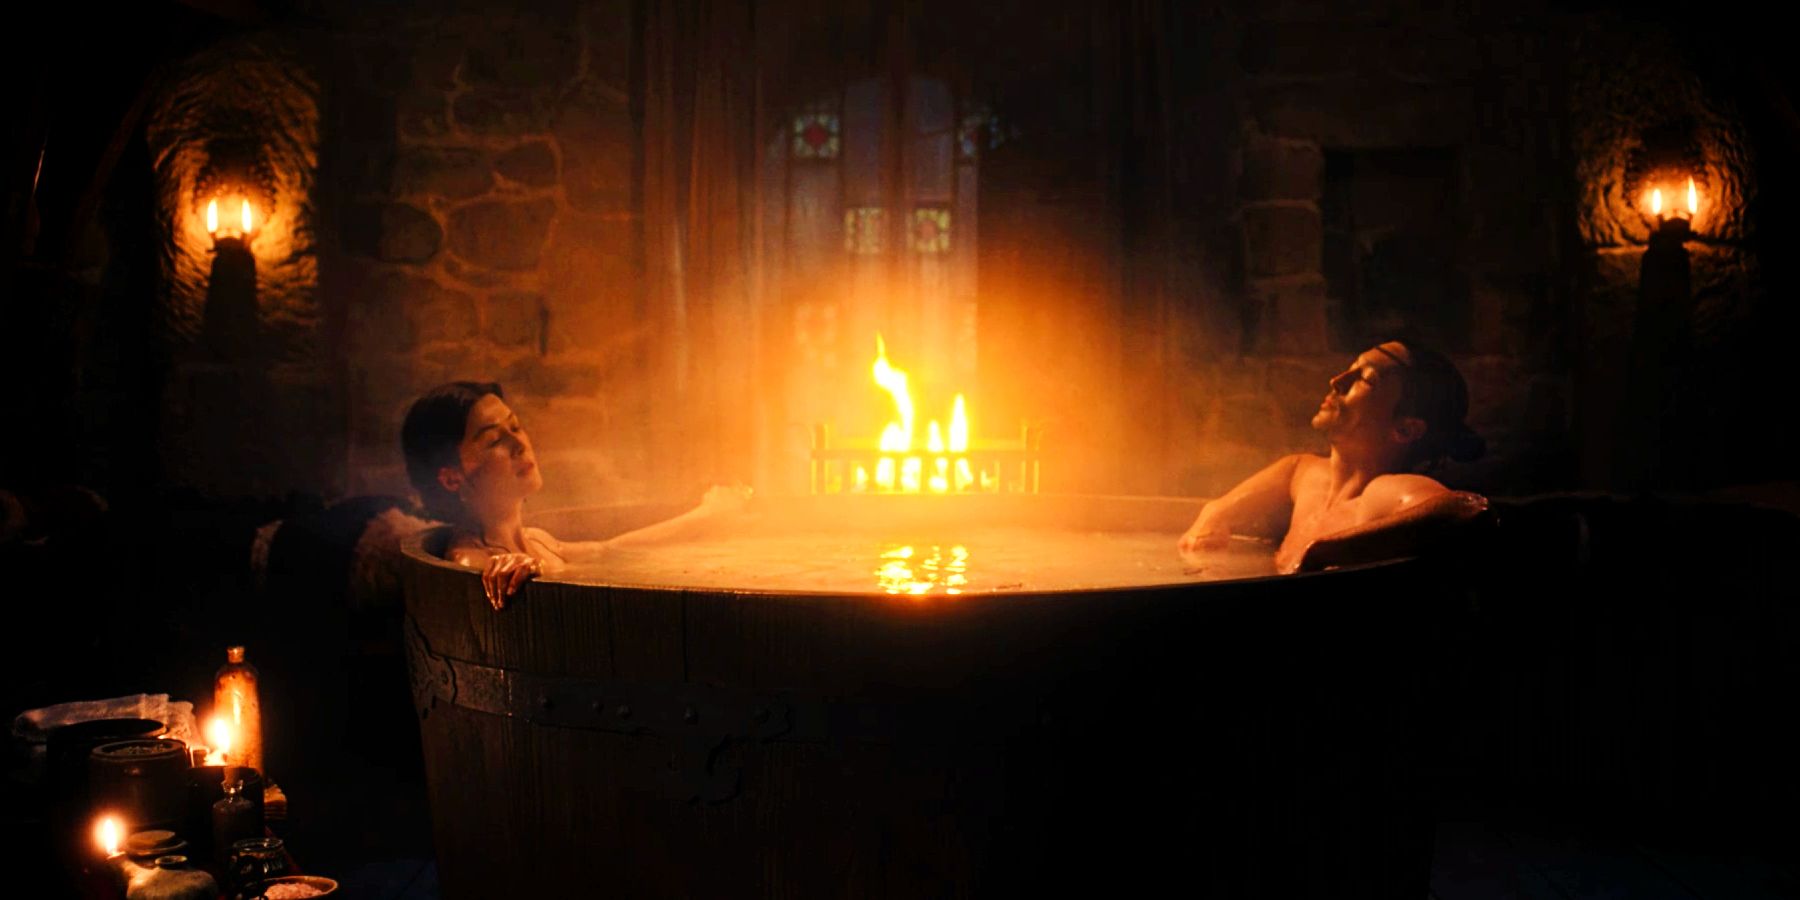 Moiraine and Lan bathing from The Wheel of Time